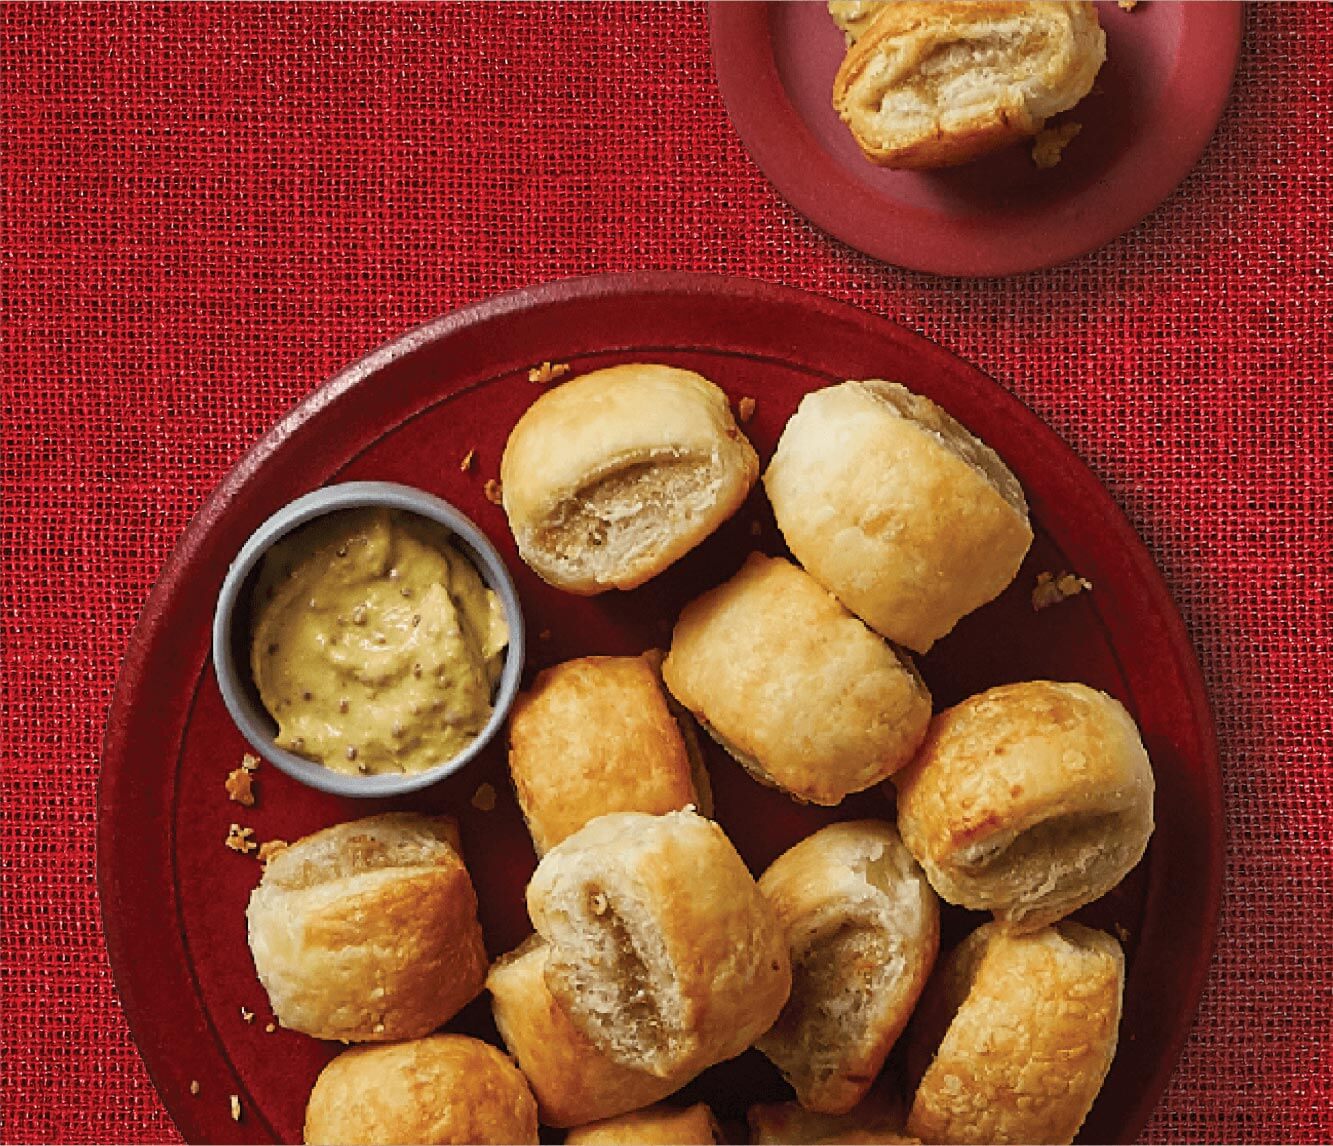 A red large red plate of golden baked sausage rolls with a dipping sauce, and a smaller red plate withn a single sausage roll in the upper right hand corner.